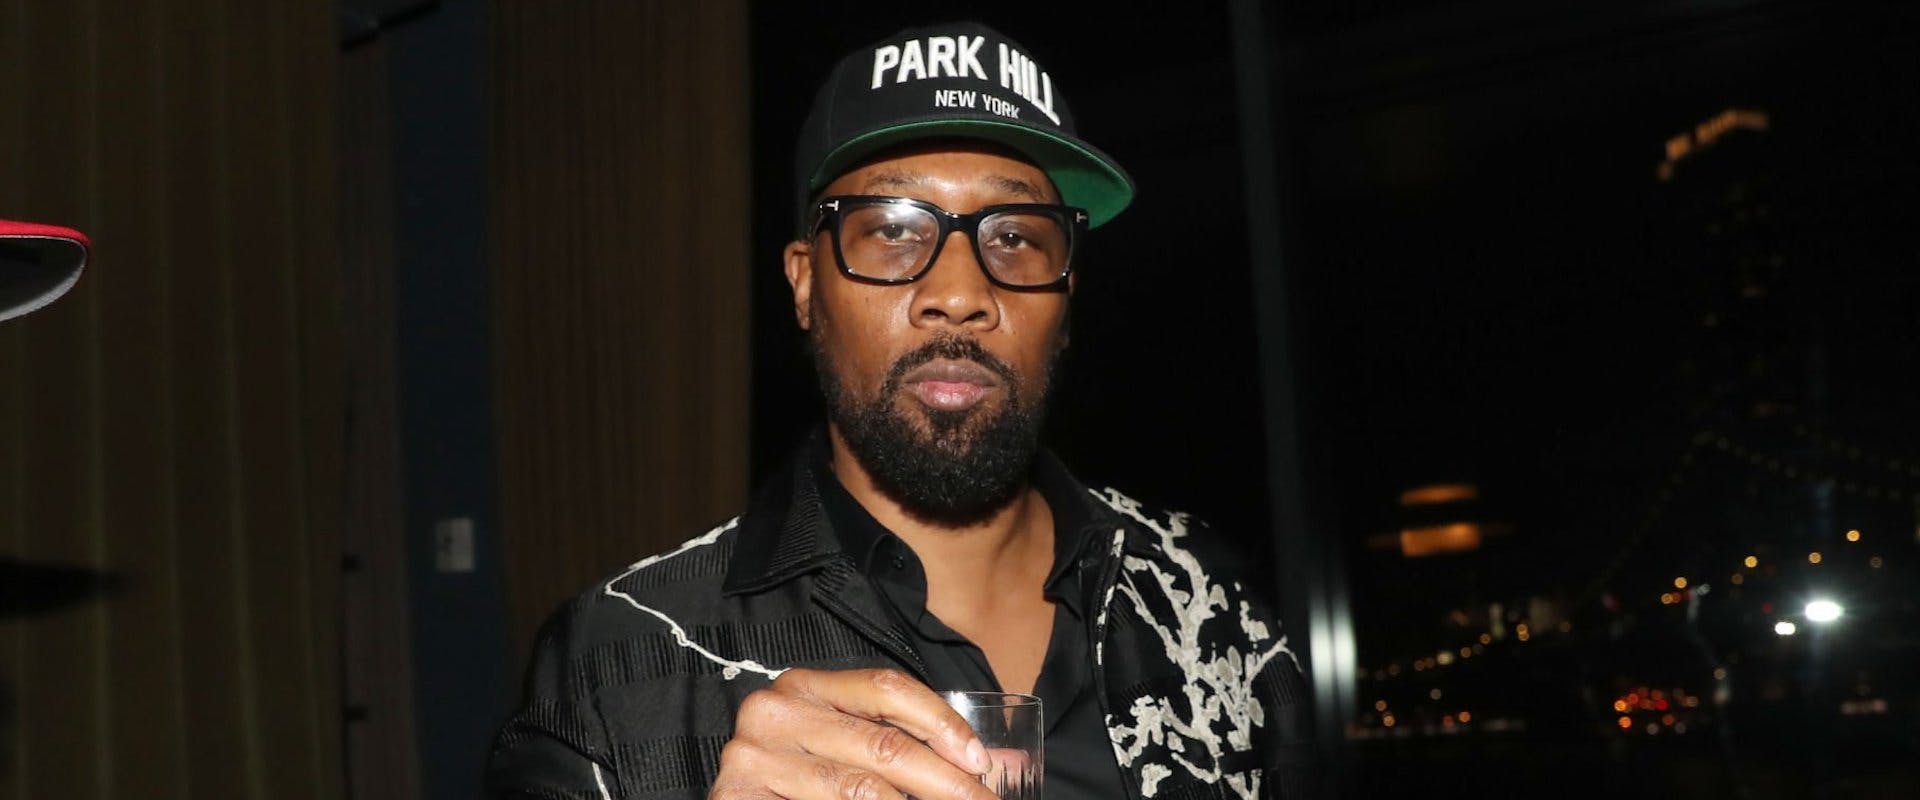 The Rza attends Steve Rifkind's 60th Birthday Party on March 18, 2022 in New York City. (Photo by Johnny Nunez/WireImage)